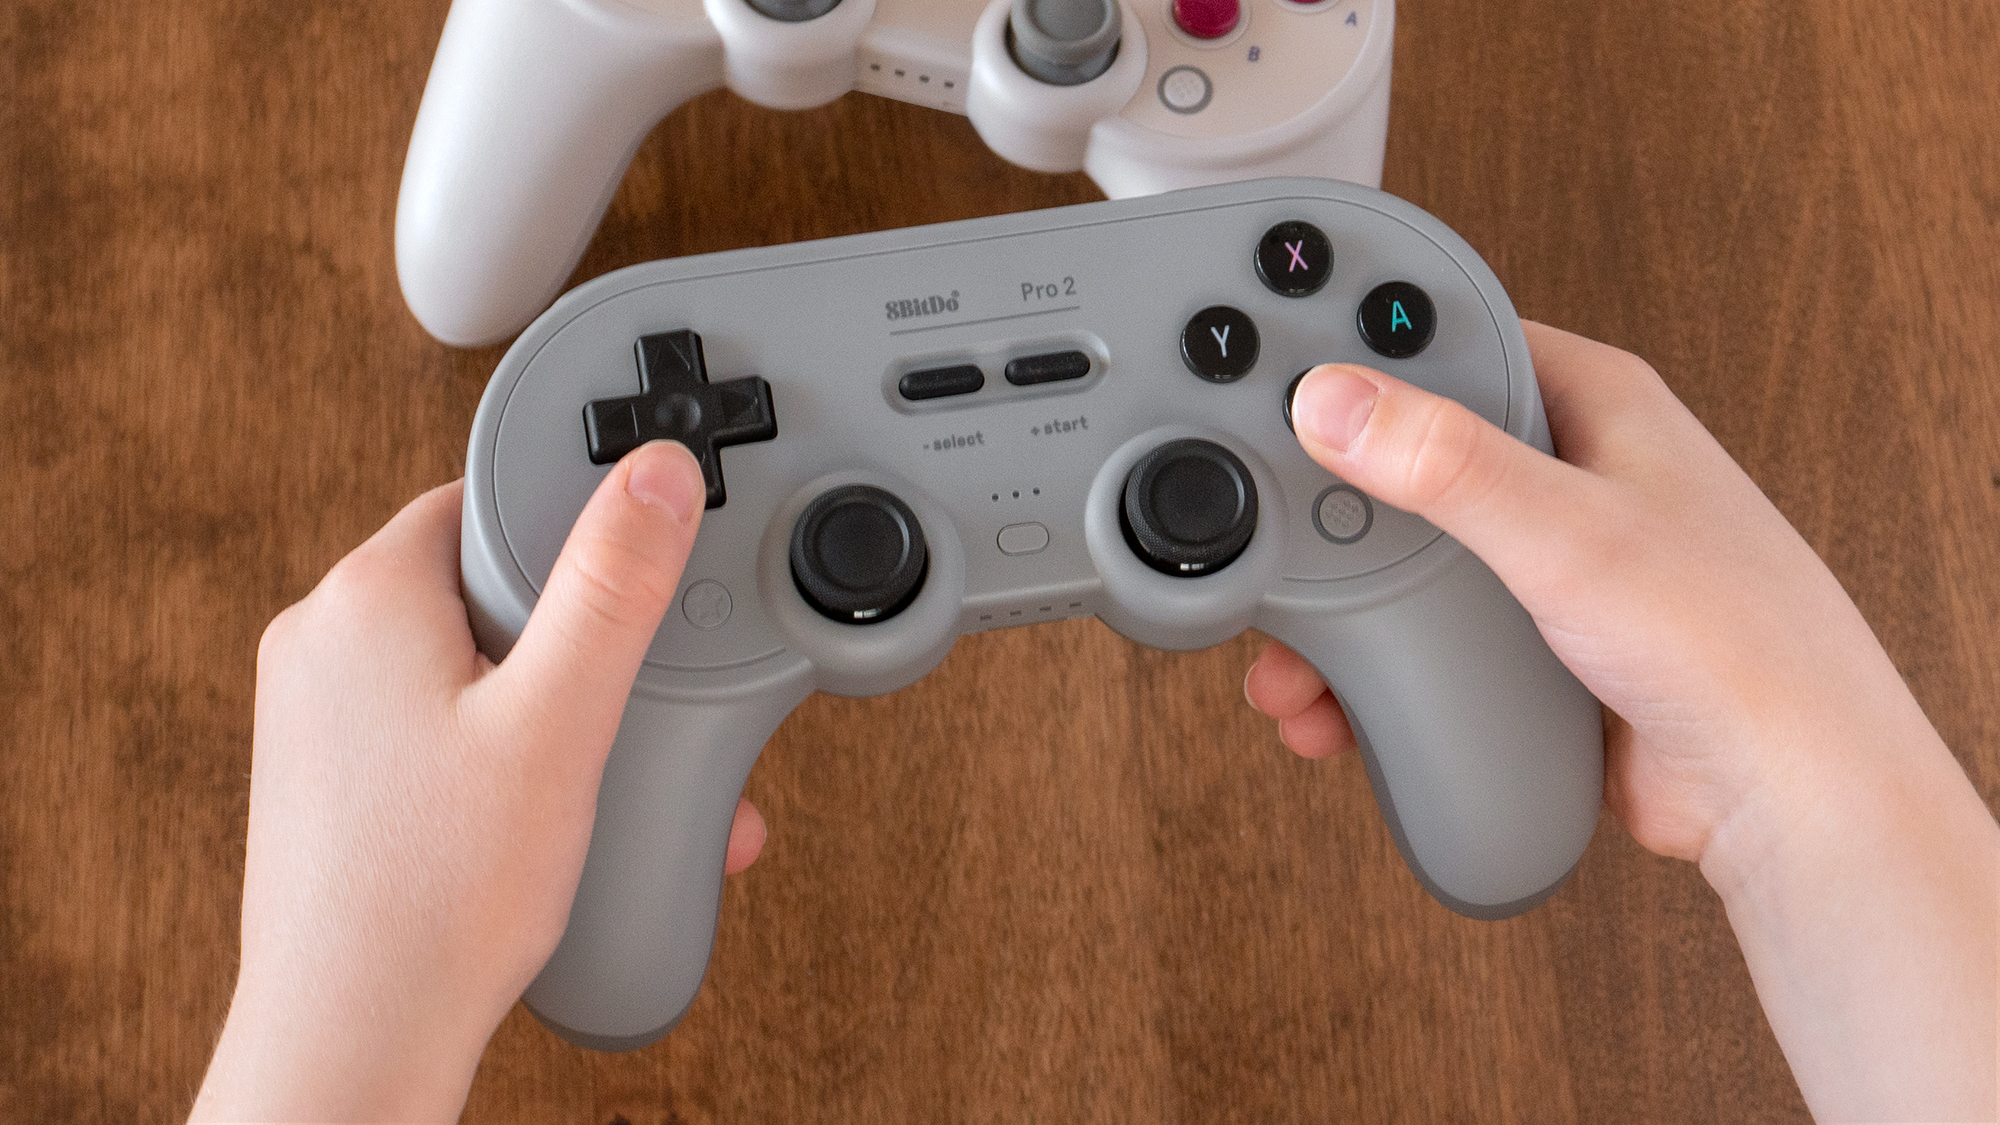 At $US50 ($66), the new 8BitDo Pro 2 is priced exactly the same as its predecessor. But even if you find the SN30 Pro+ discounted as a result, don't buy it — the upgraded functionality of the Pro 2 is worth the extra cost. (Photo: Andrew Liszewski/Gizmodo)